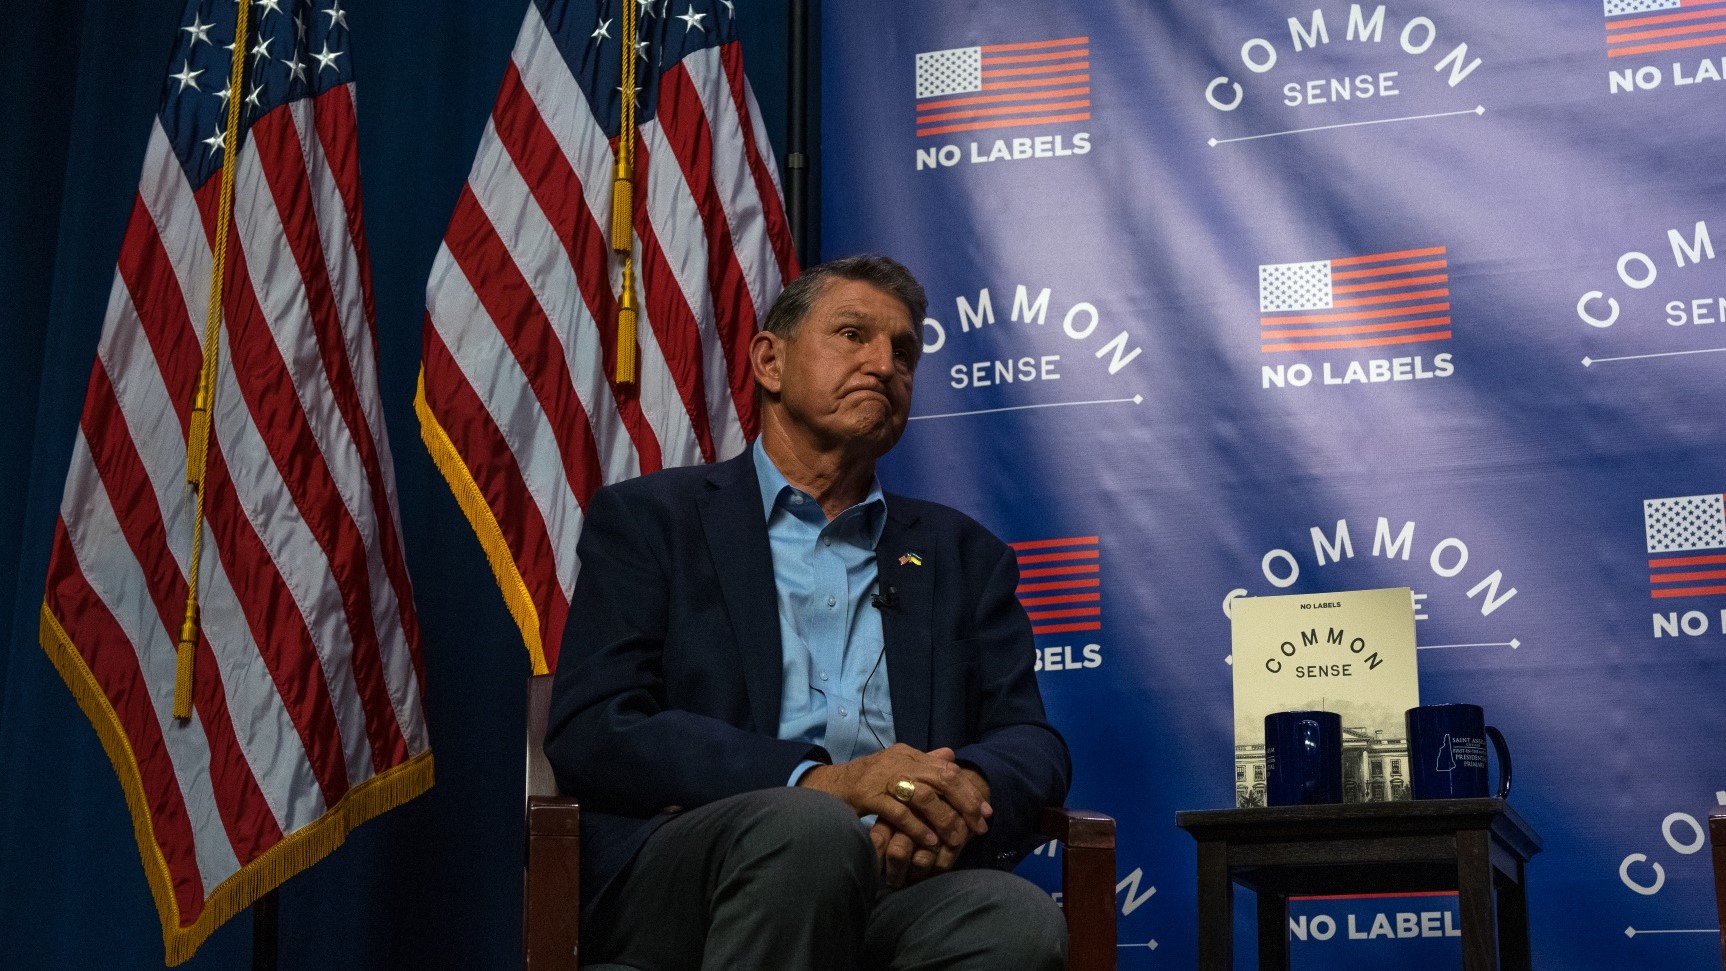 Democrat senator Joe Manchin was co-headliner at the ‘Common Sense’ Town Hall, a recent event in New Hampshire sponsored by the bipartisan group No Labels. Photo: John Tully/Washington Post/Getty